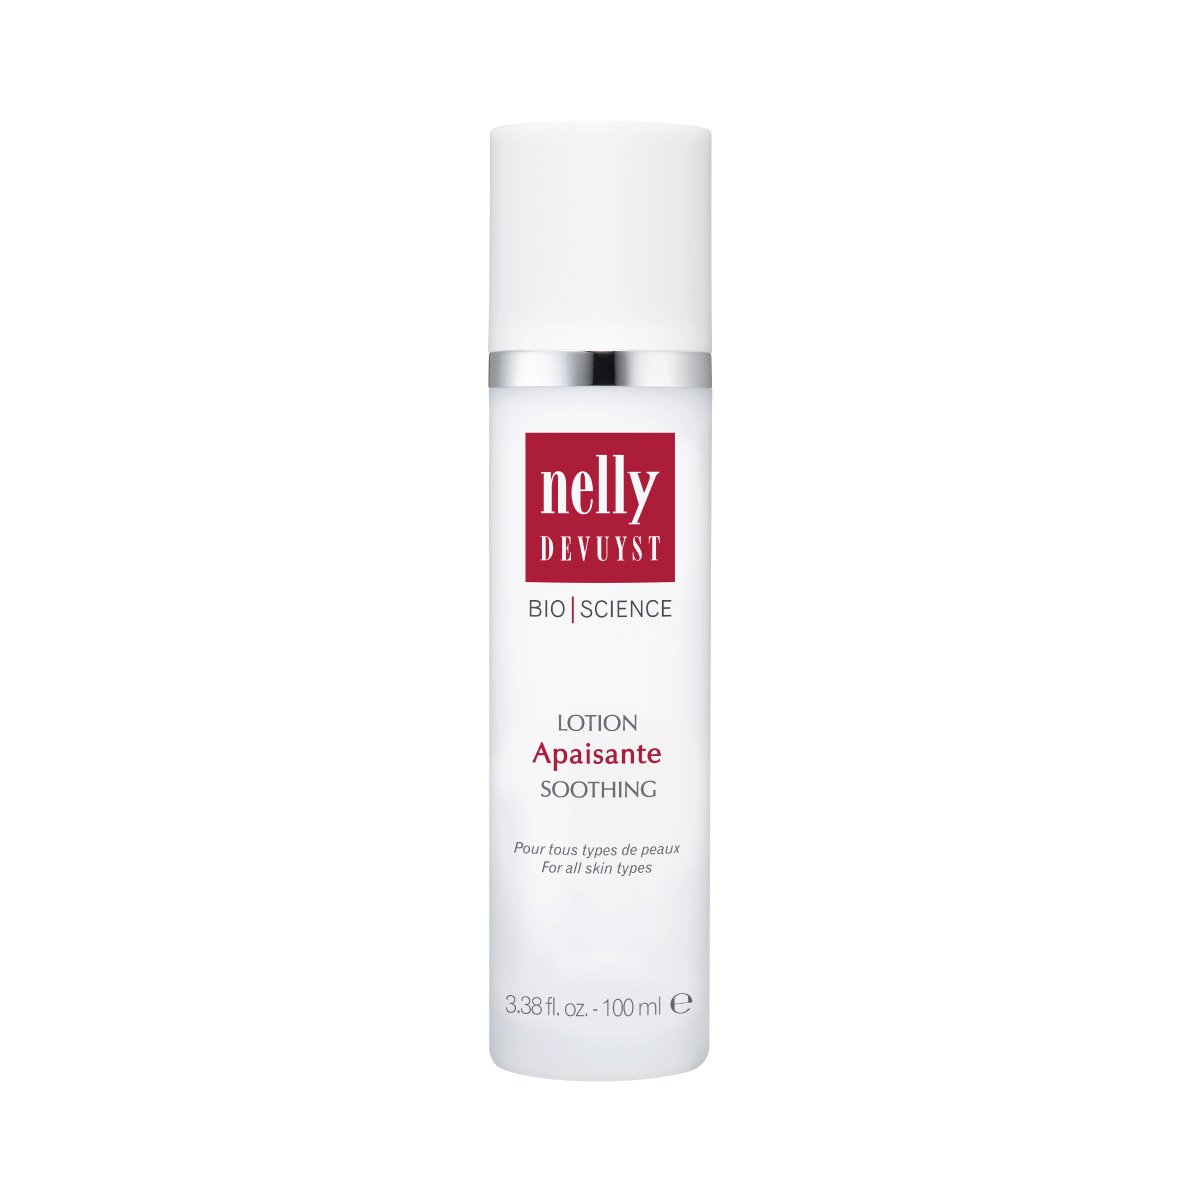 Lotion Apaisante Bioscience - Nelly Devuyst